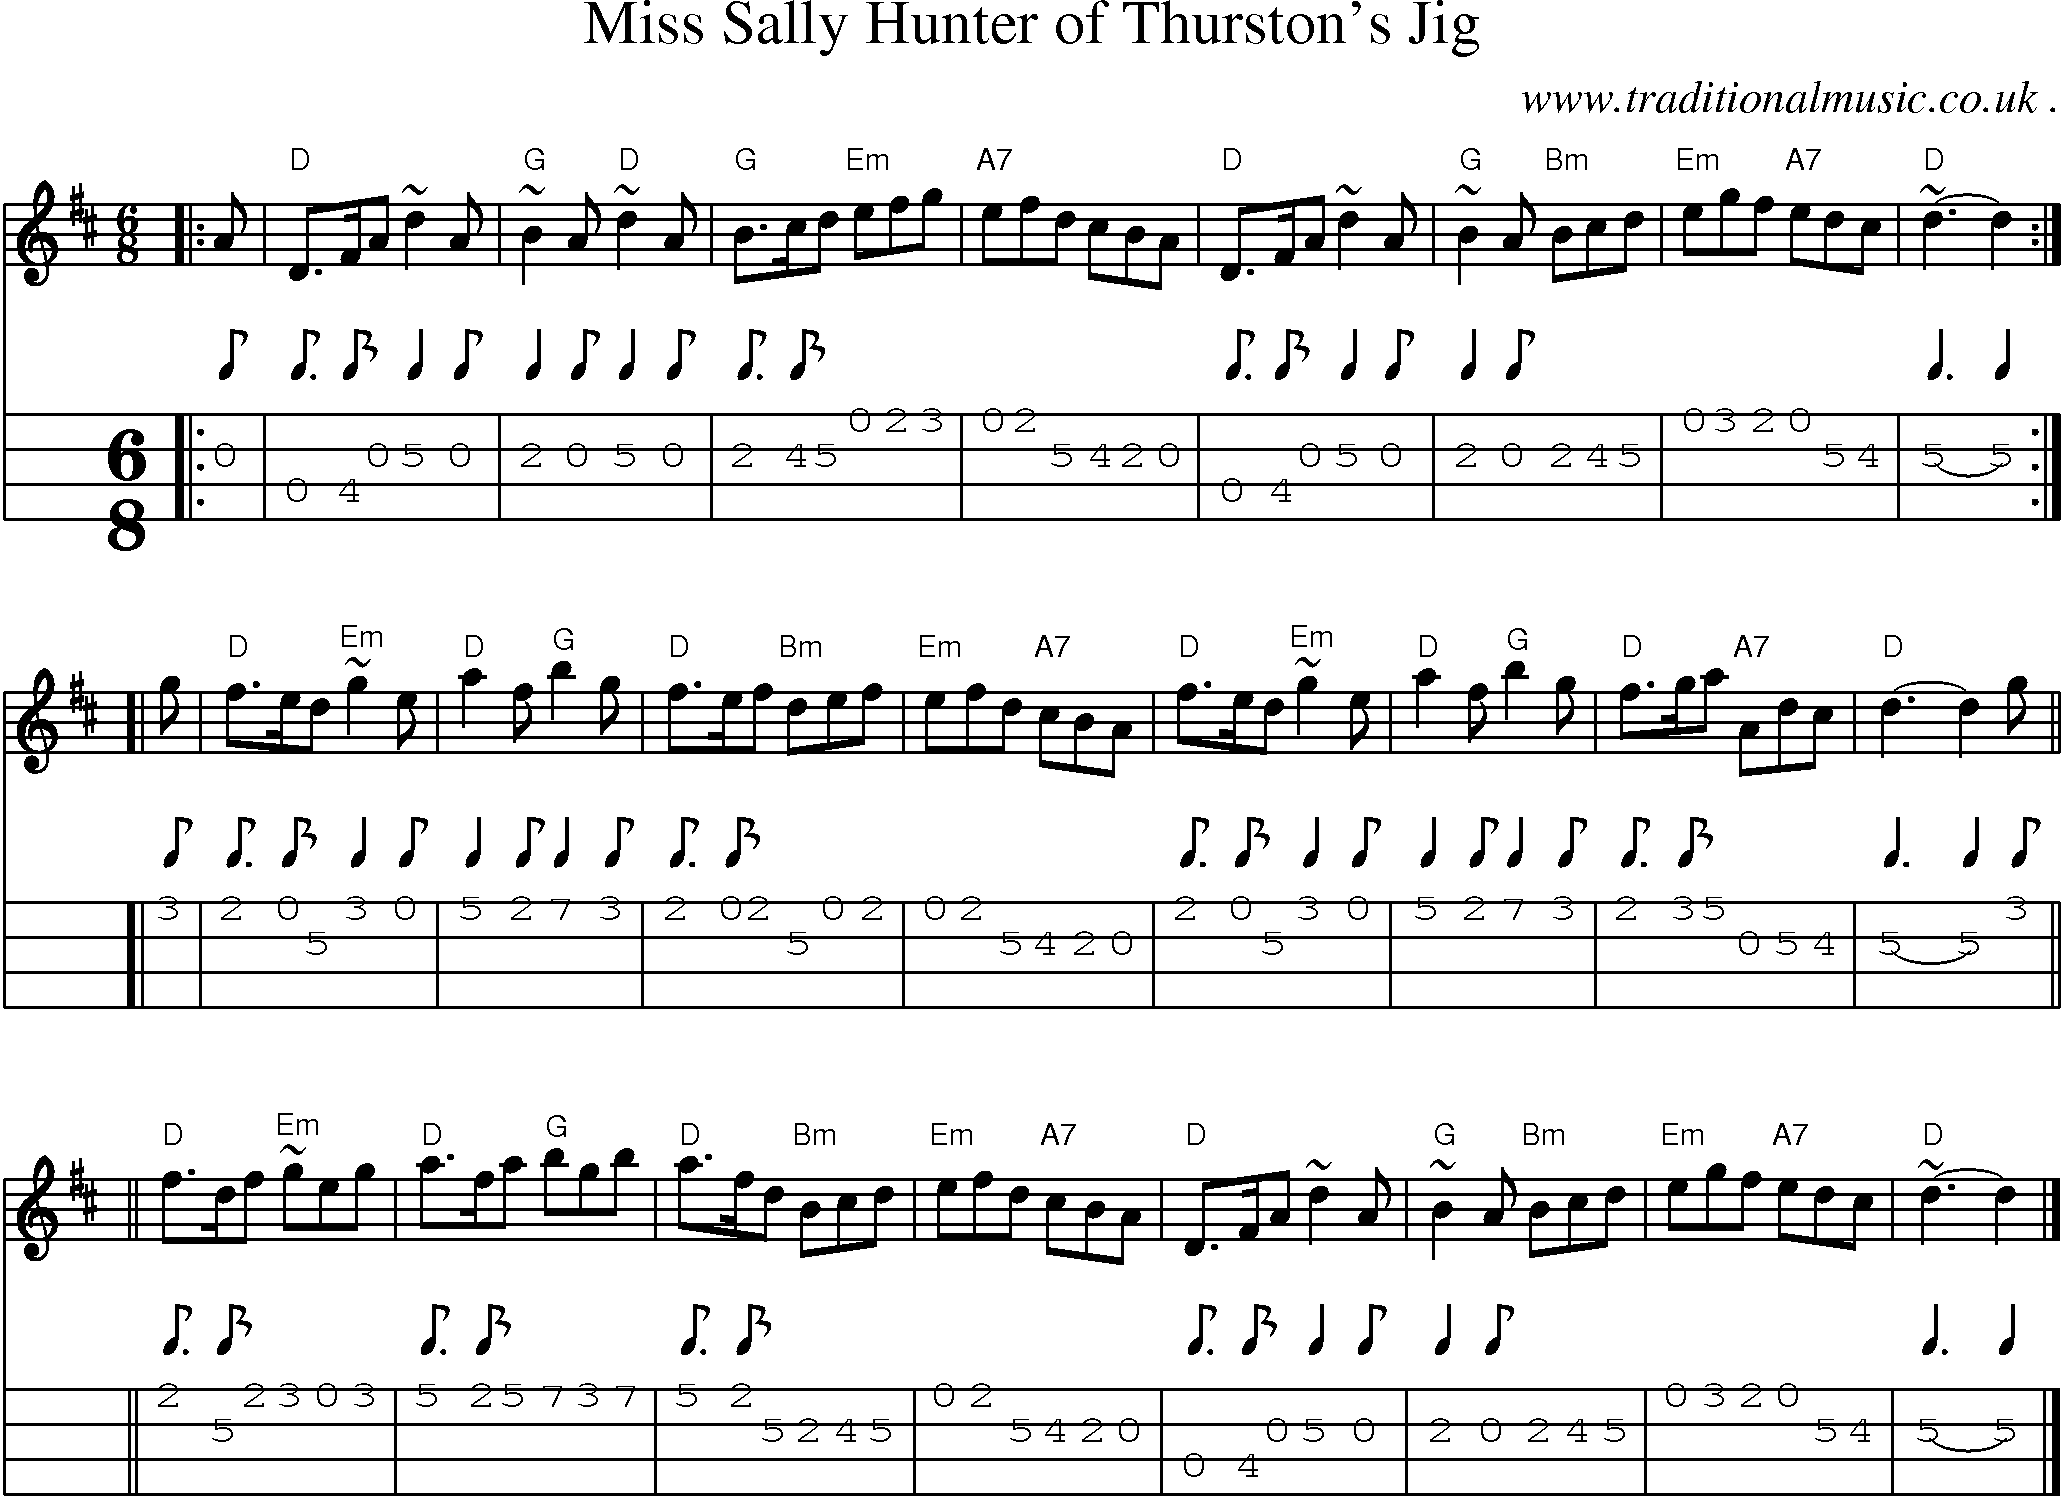 Sheet-music  score, Chords and Mandolin Tabs for Miss Sally Hunter Of Thurstons Jig